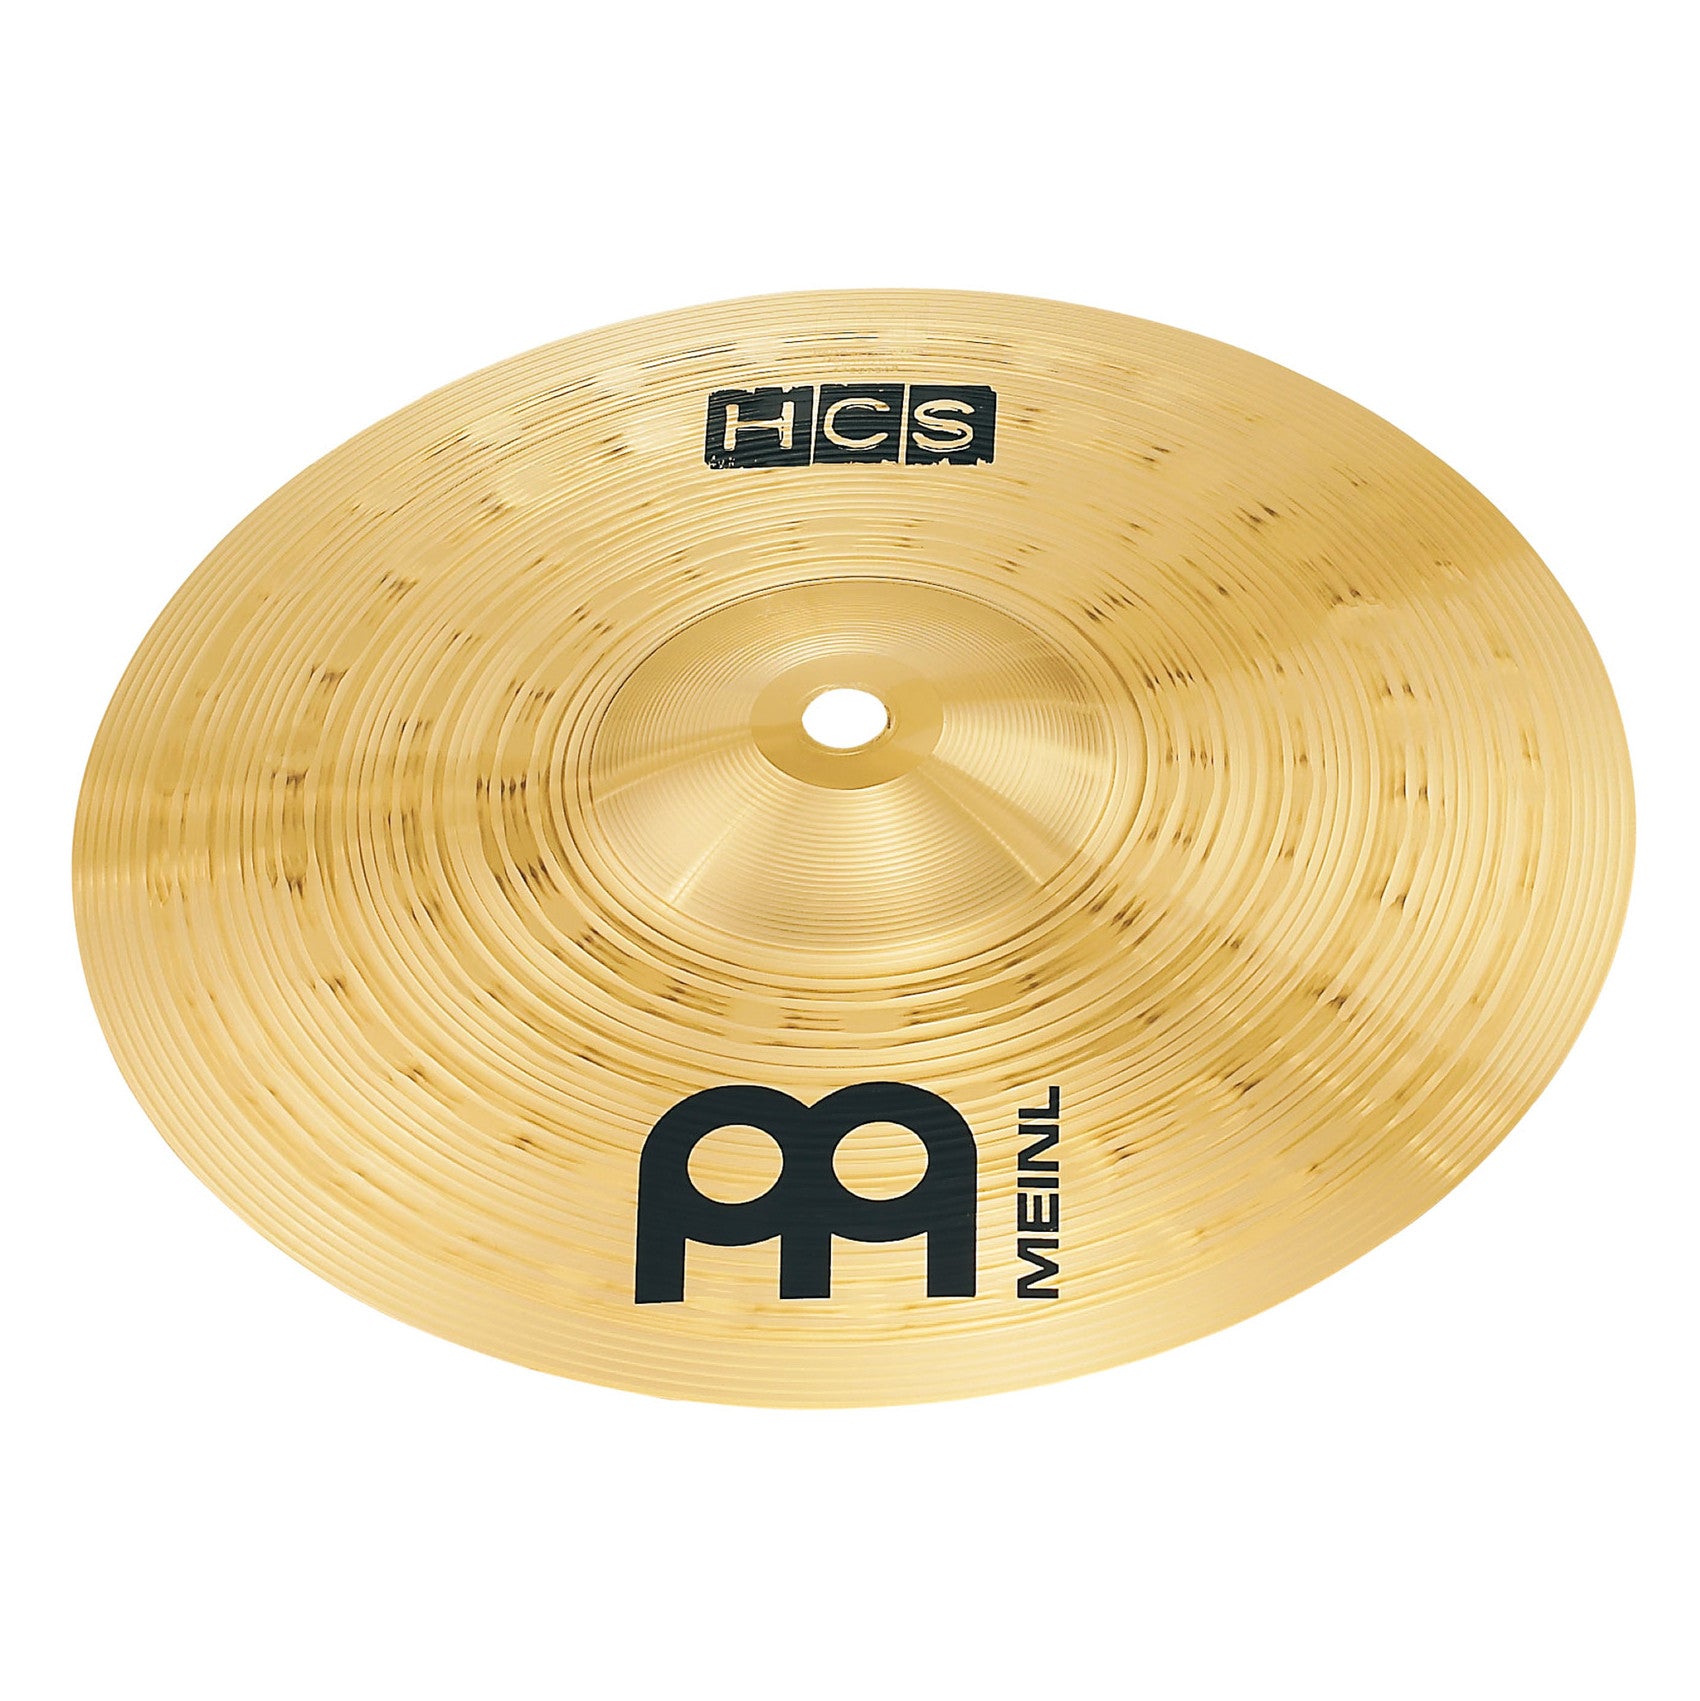 Shop online for Meinl HCS 10" Splash Cymbal HCS10S today. Now available for purchase from Midlothian Music of Orland Park, Illinois, USA